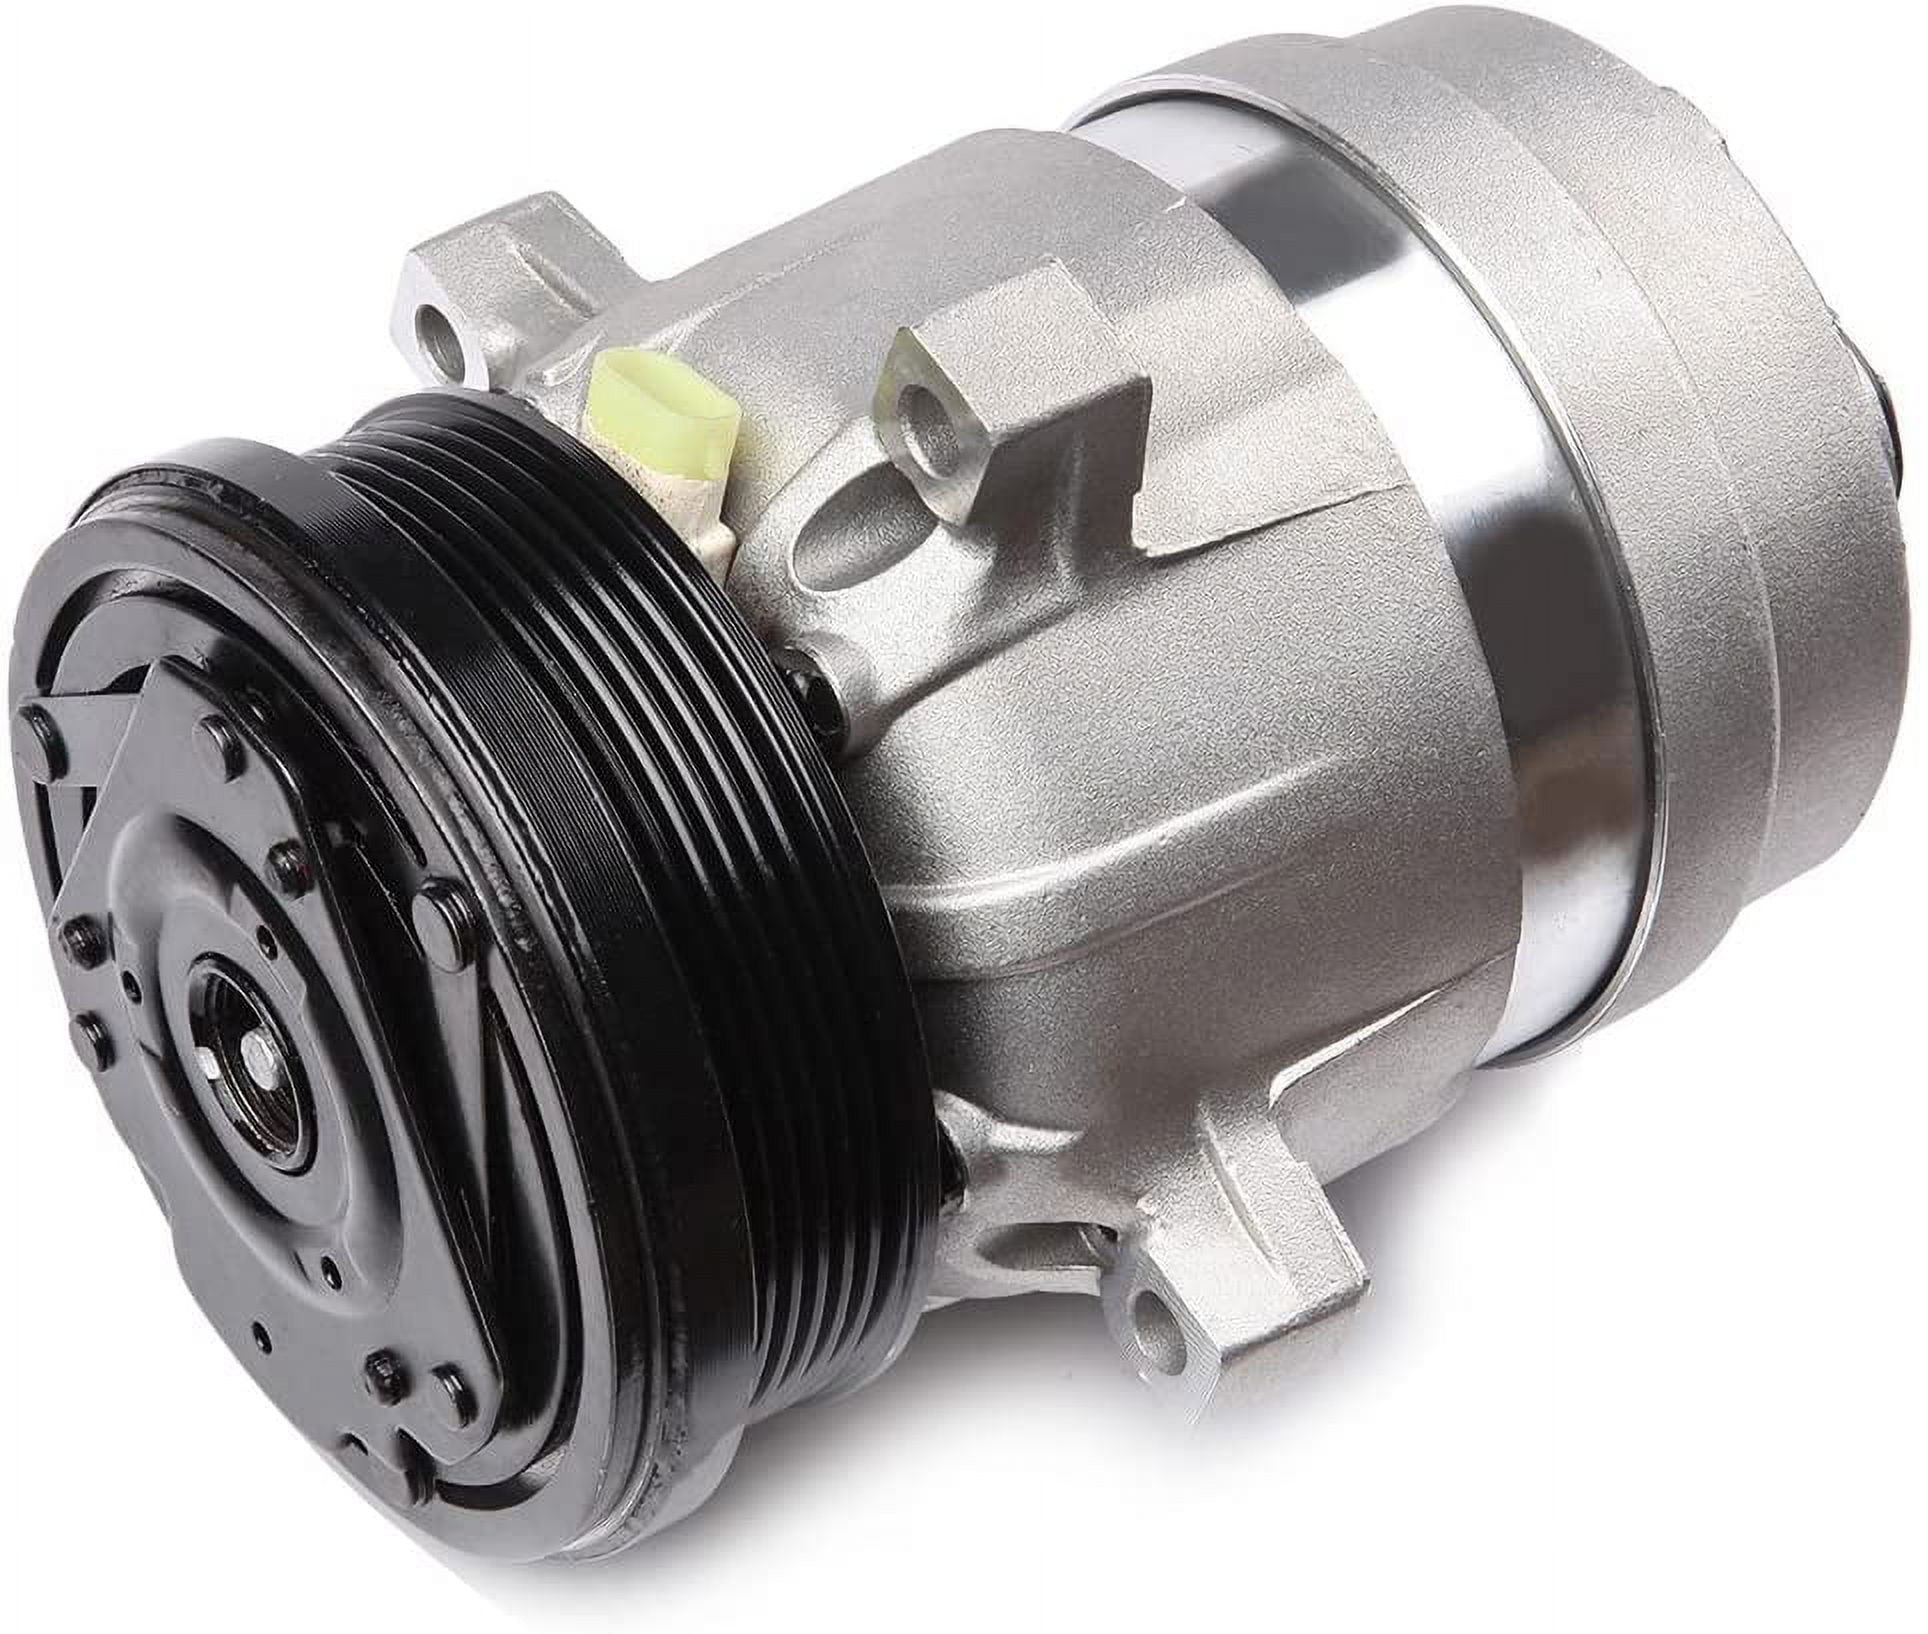 SCITOO Compatible with CO 101390C 11101390 AC Compressor Pump 1993